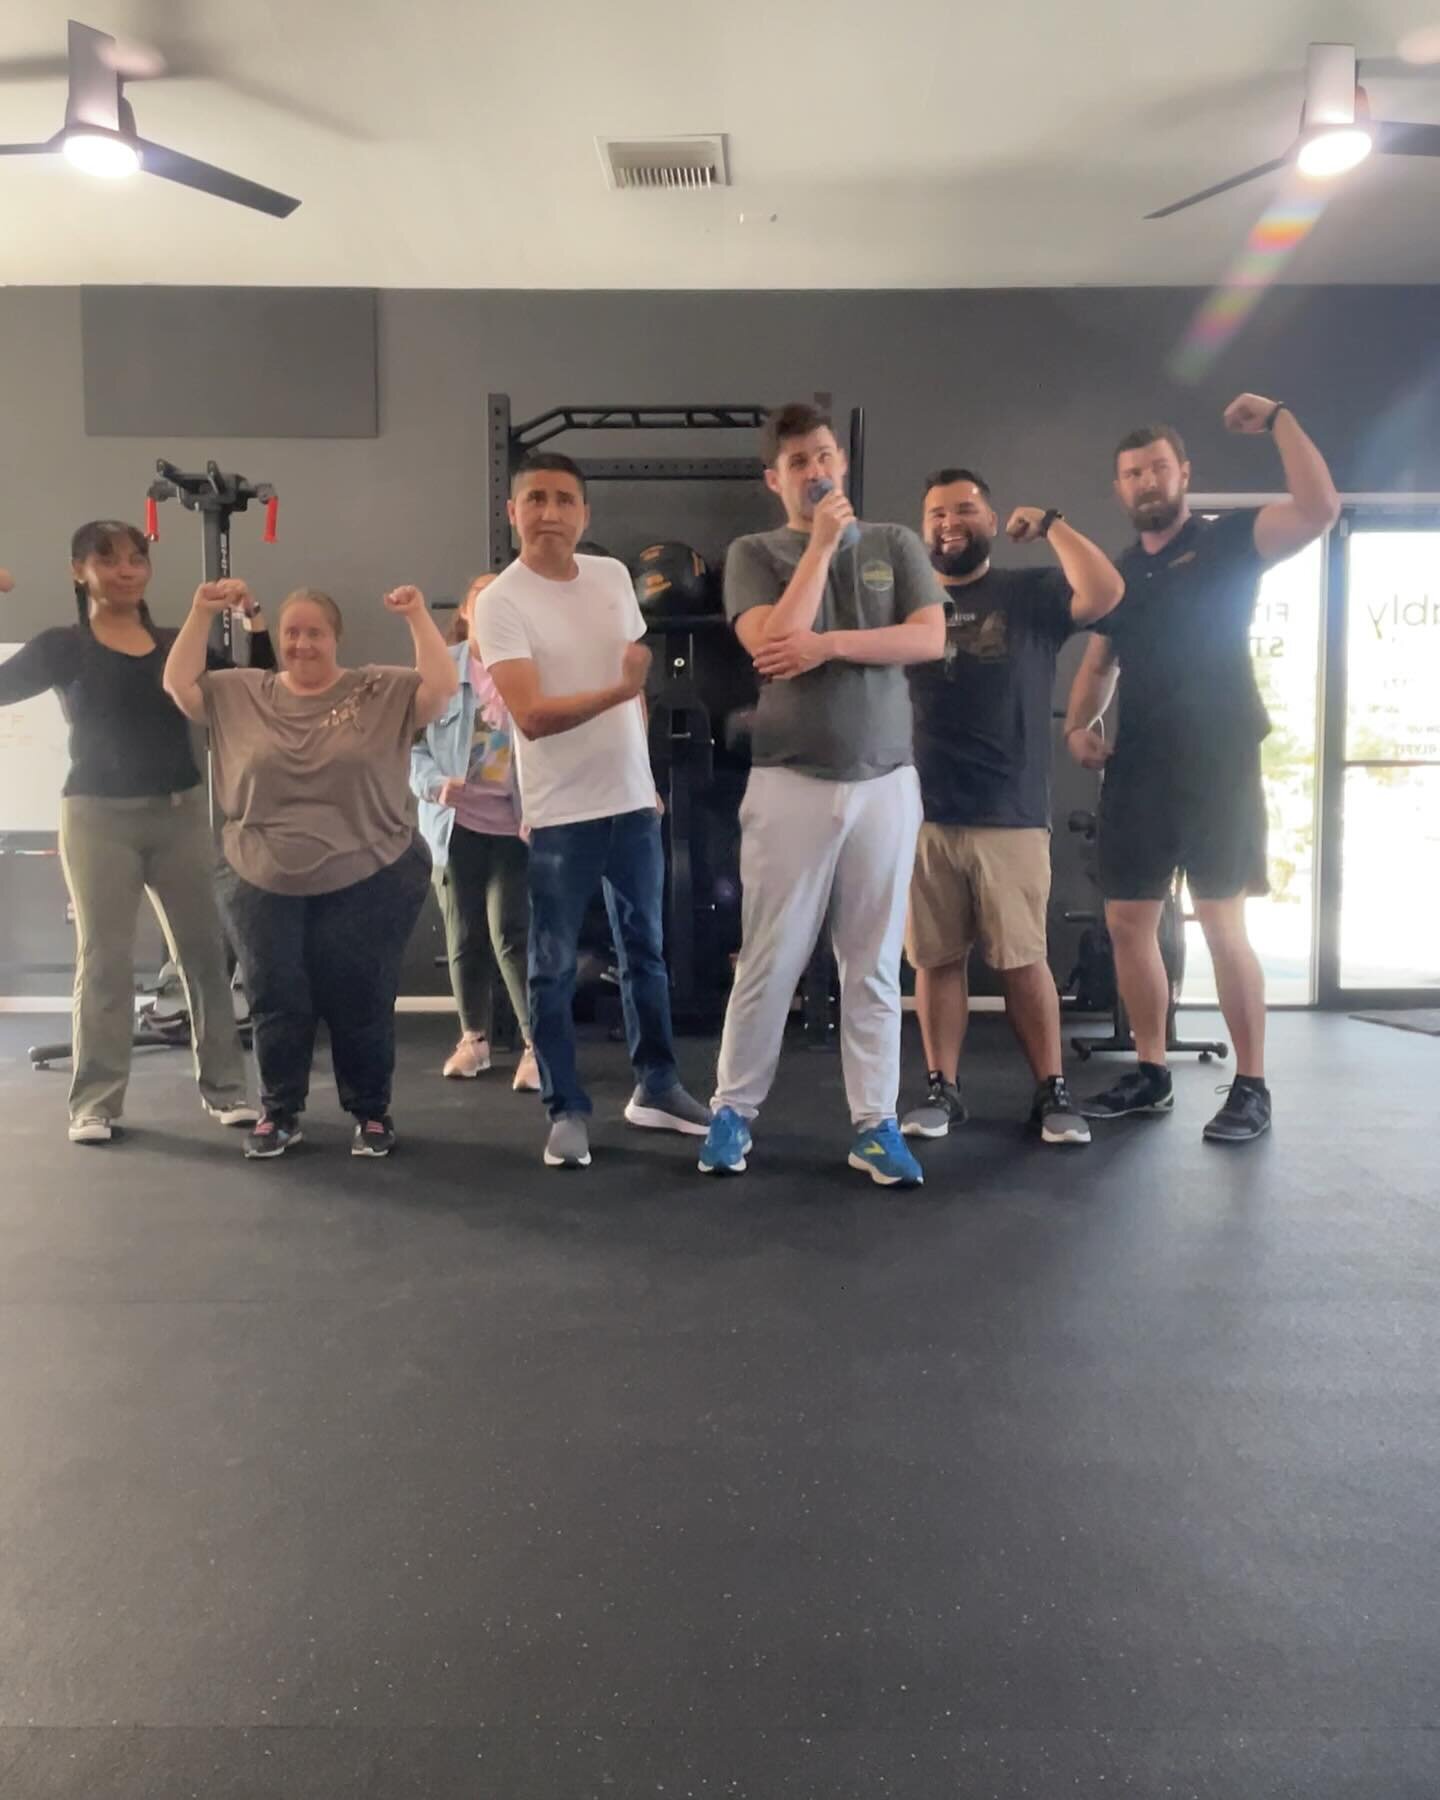 Team photo from Wednesday&rsquo;s Adaptive fitness group session!

It&rsquo;s amazing to see everyone&rsquo;s progress this week! 💪

Thanks for making this a great workout @olo90 @mikey199518 and everyone else who isn&rsquo;t on IG

#adaptiveathlete